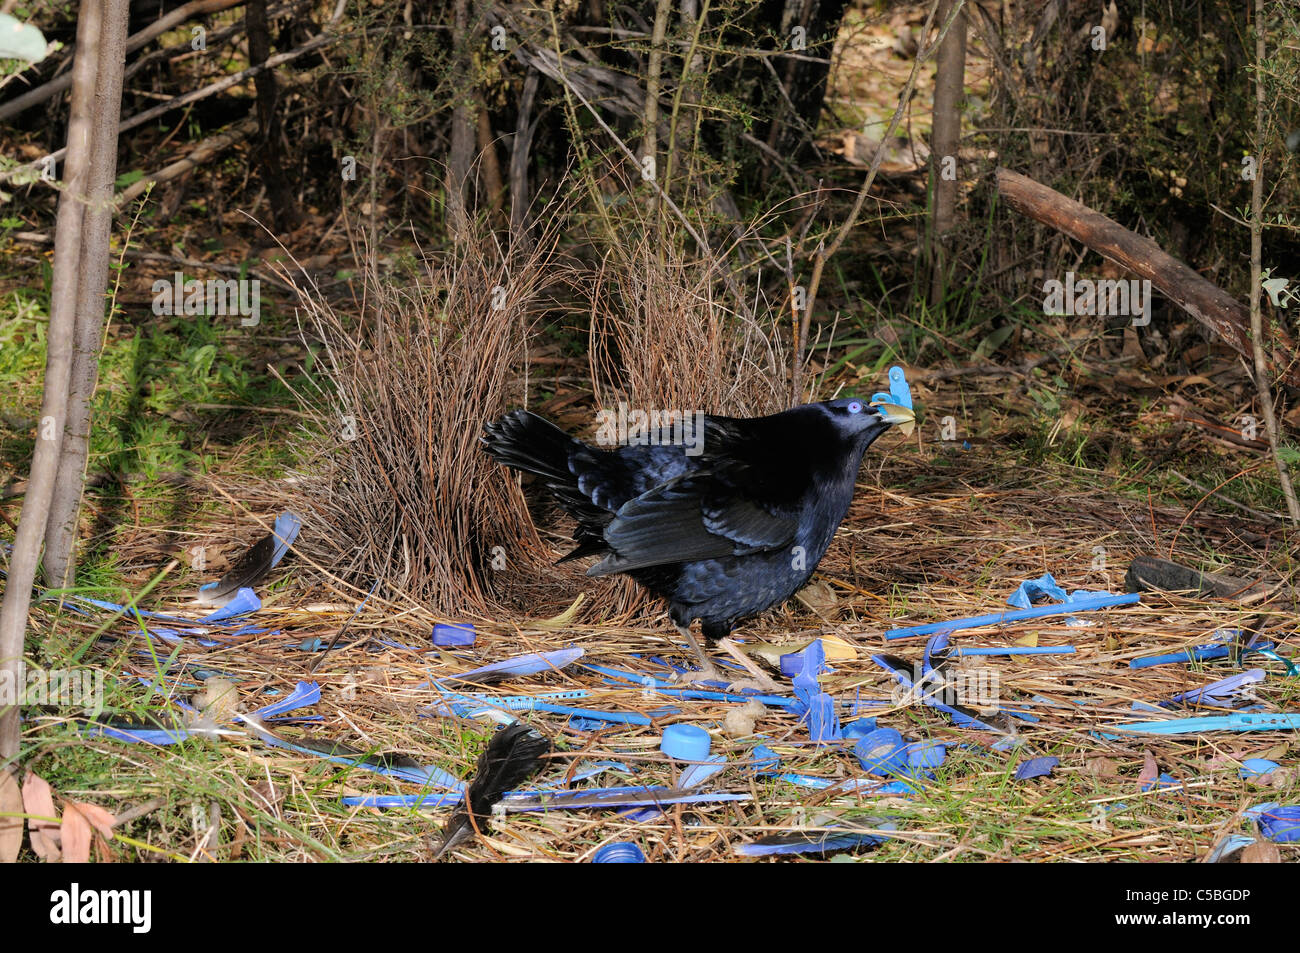 Satin Bowerbird Ptilonorhynchus violaceus Male arranging ornaments at bower Photographed in ACT, Australia Stock Photo